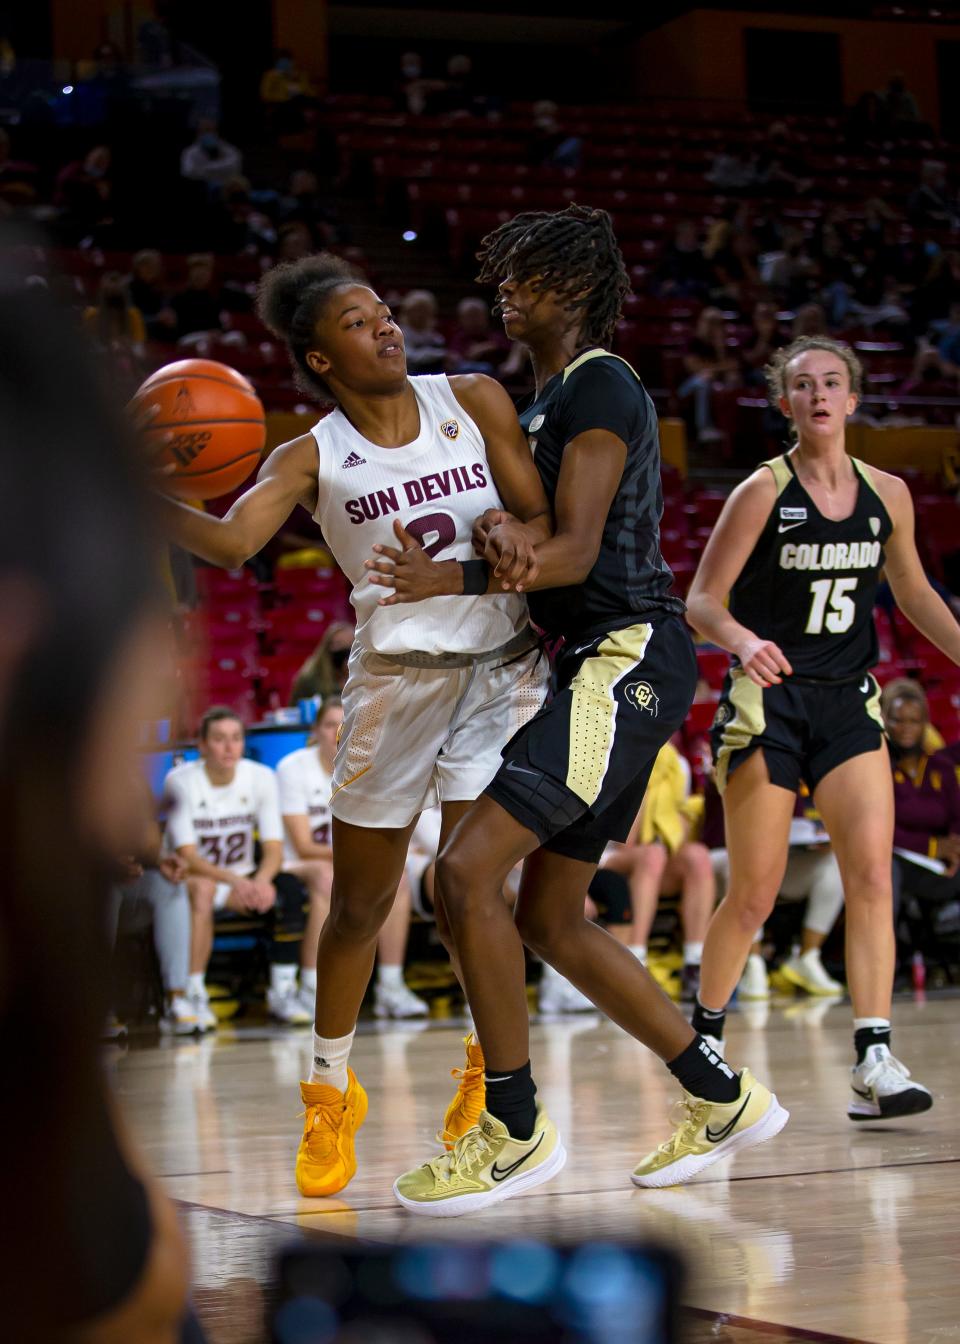 ASU's Jaddan Simmons passes the ball as Colorado's Mya Hollingshed attempts to block her during a game at Desert Financial Arena in Tempe on Jan. 21, 2022.